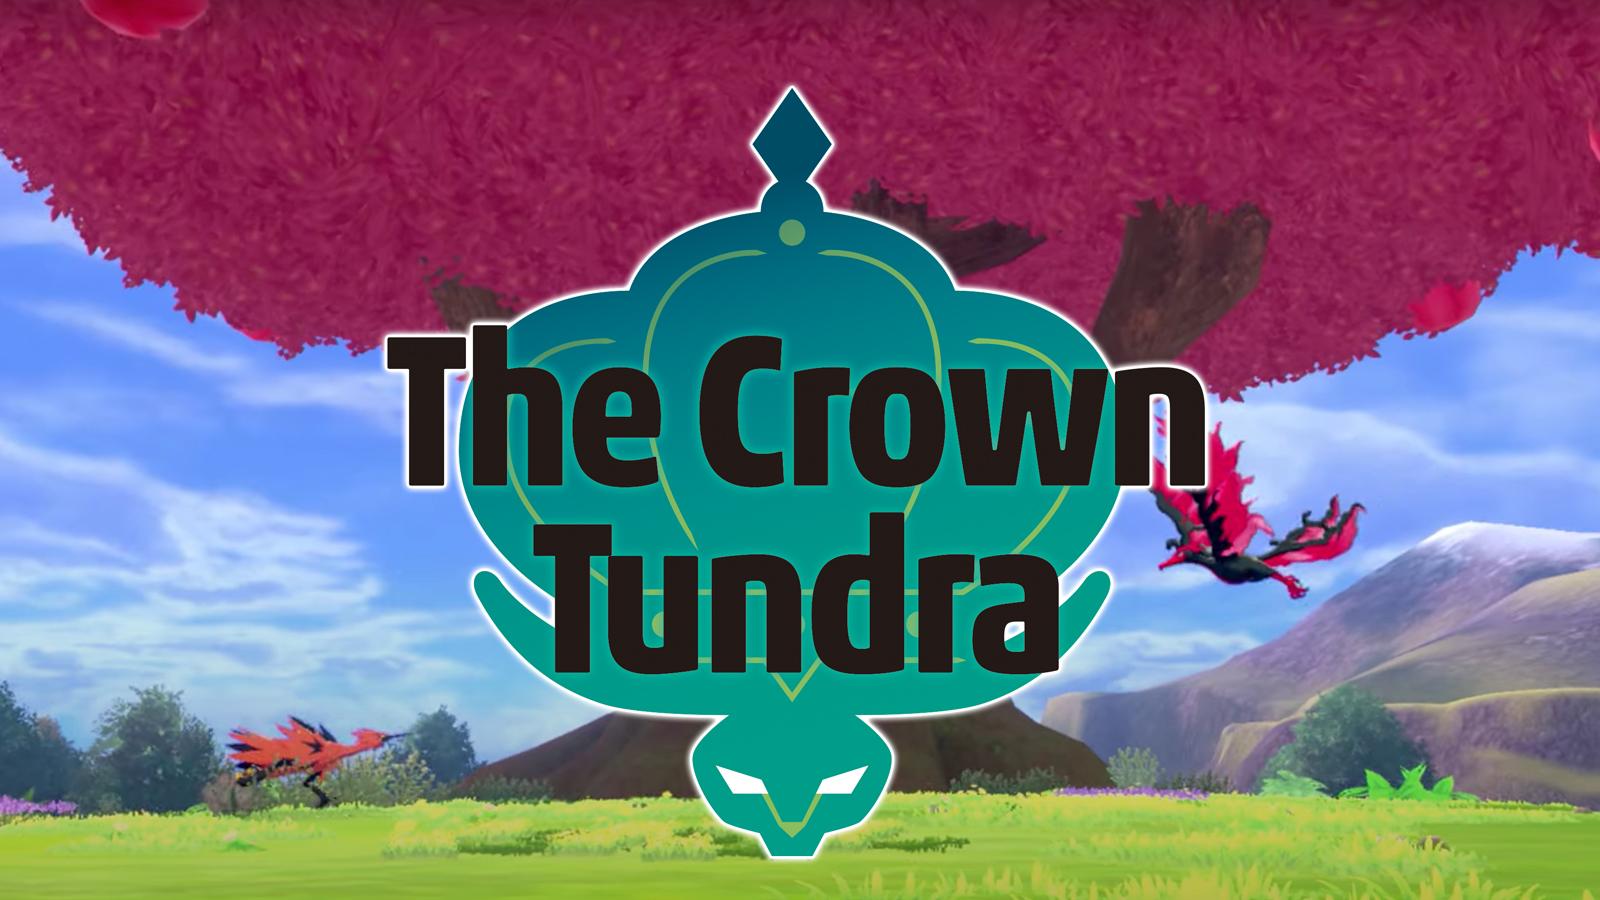 the crown tundra